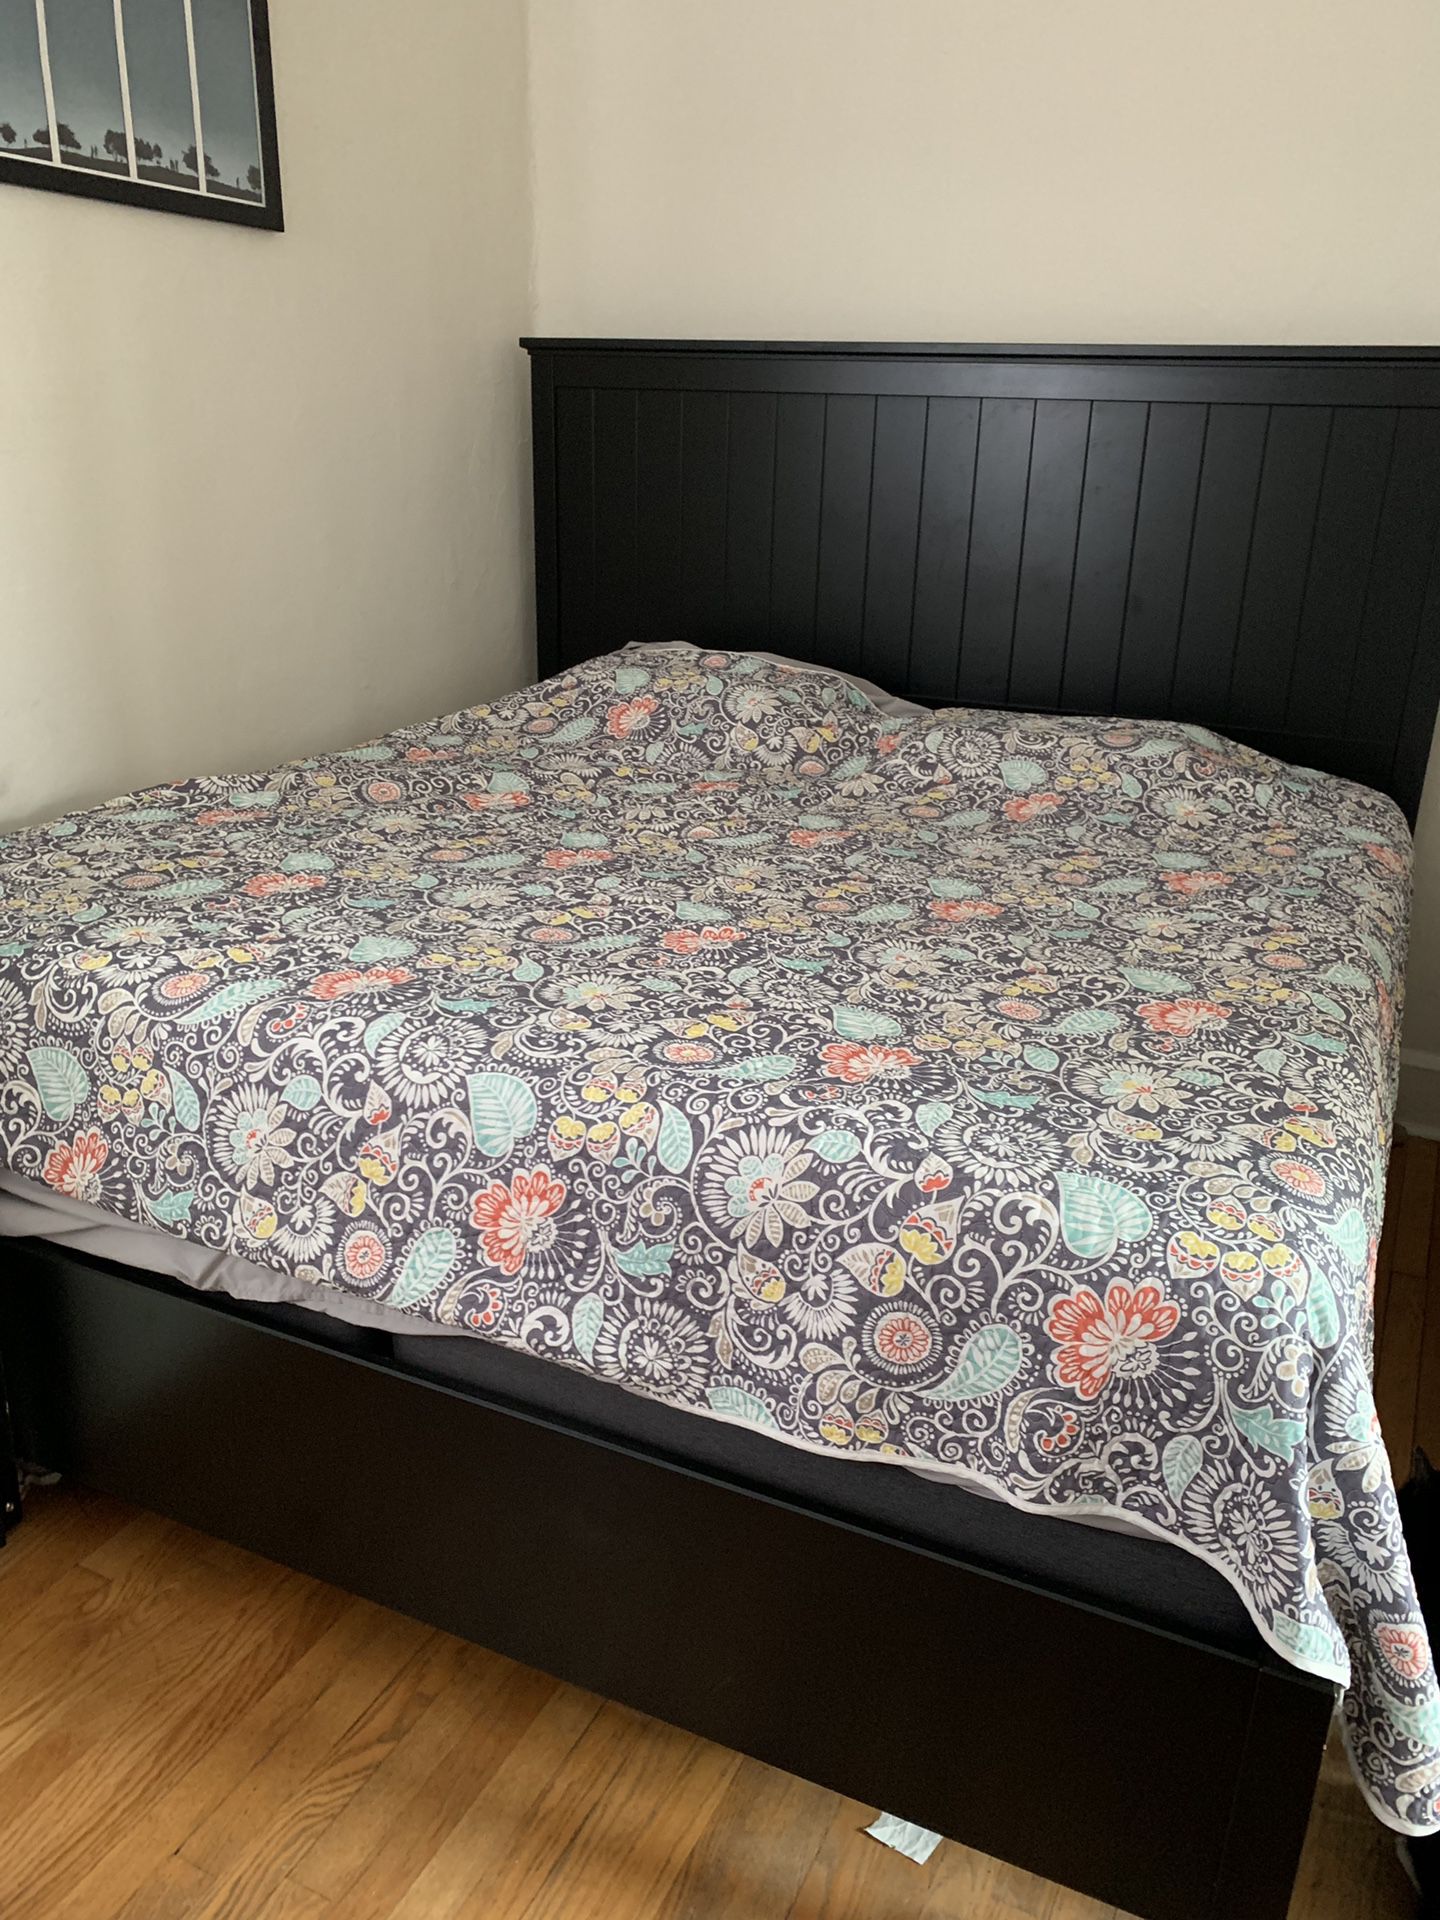 Bedroom Set: King-sized Mattress, Box Spring, and Headboard/Bed frame